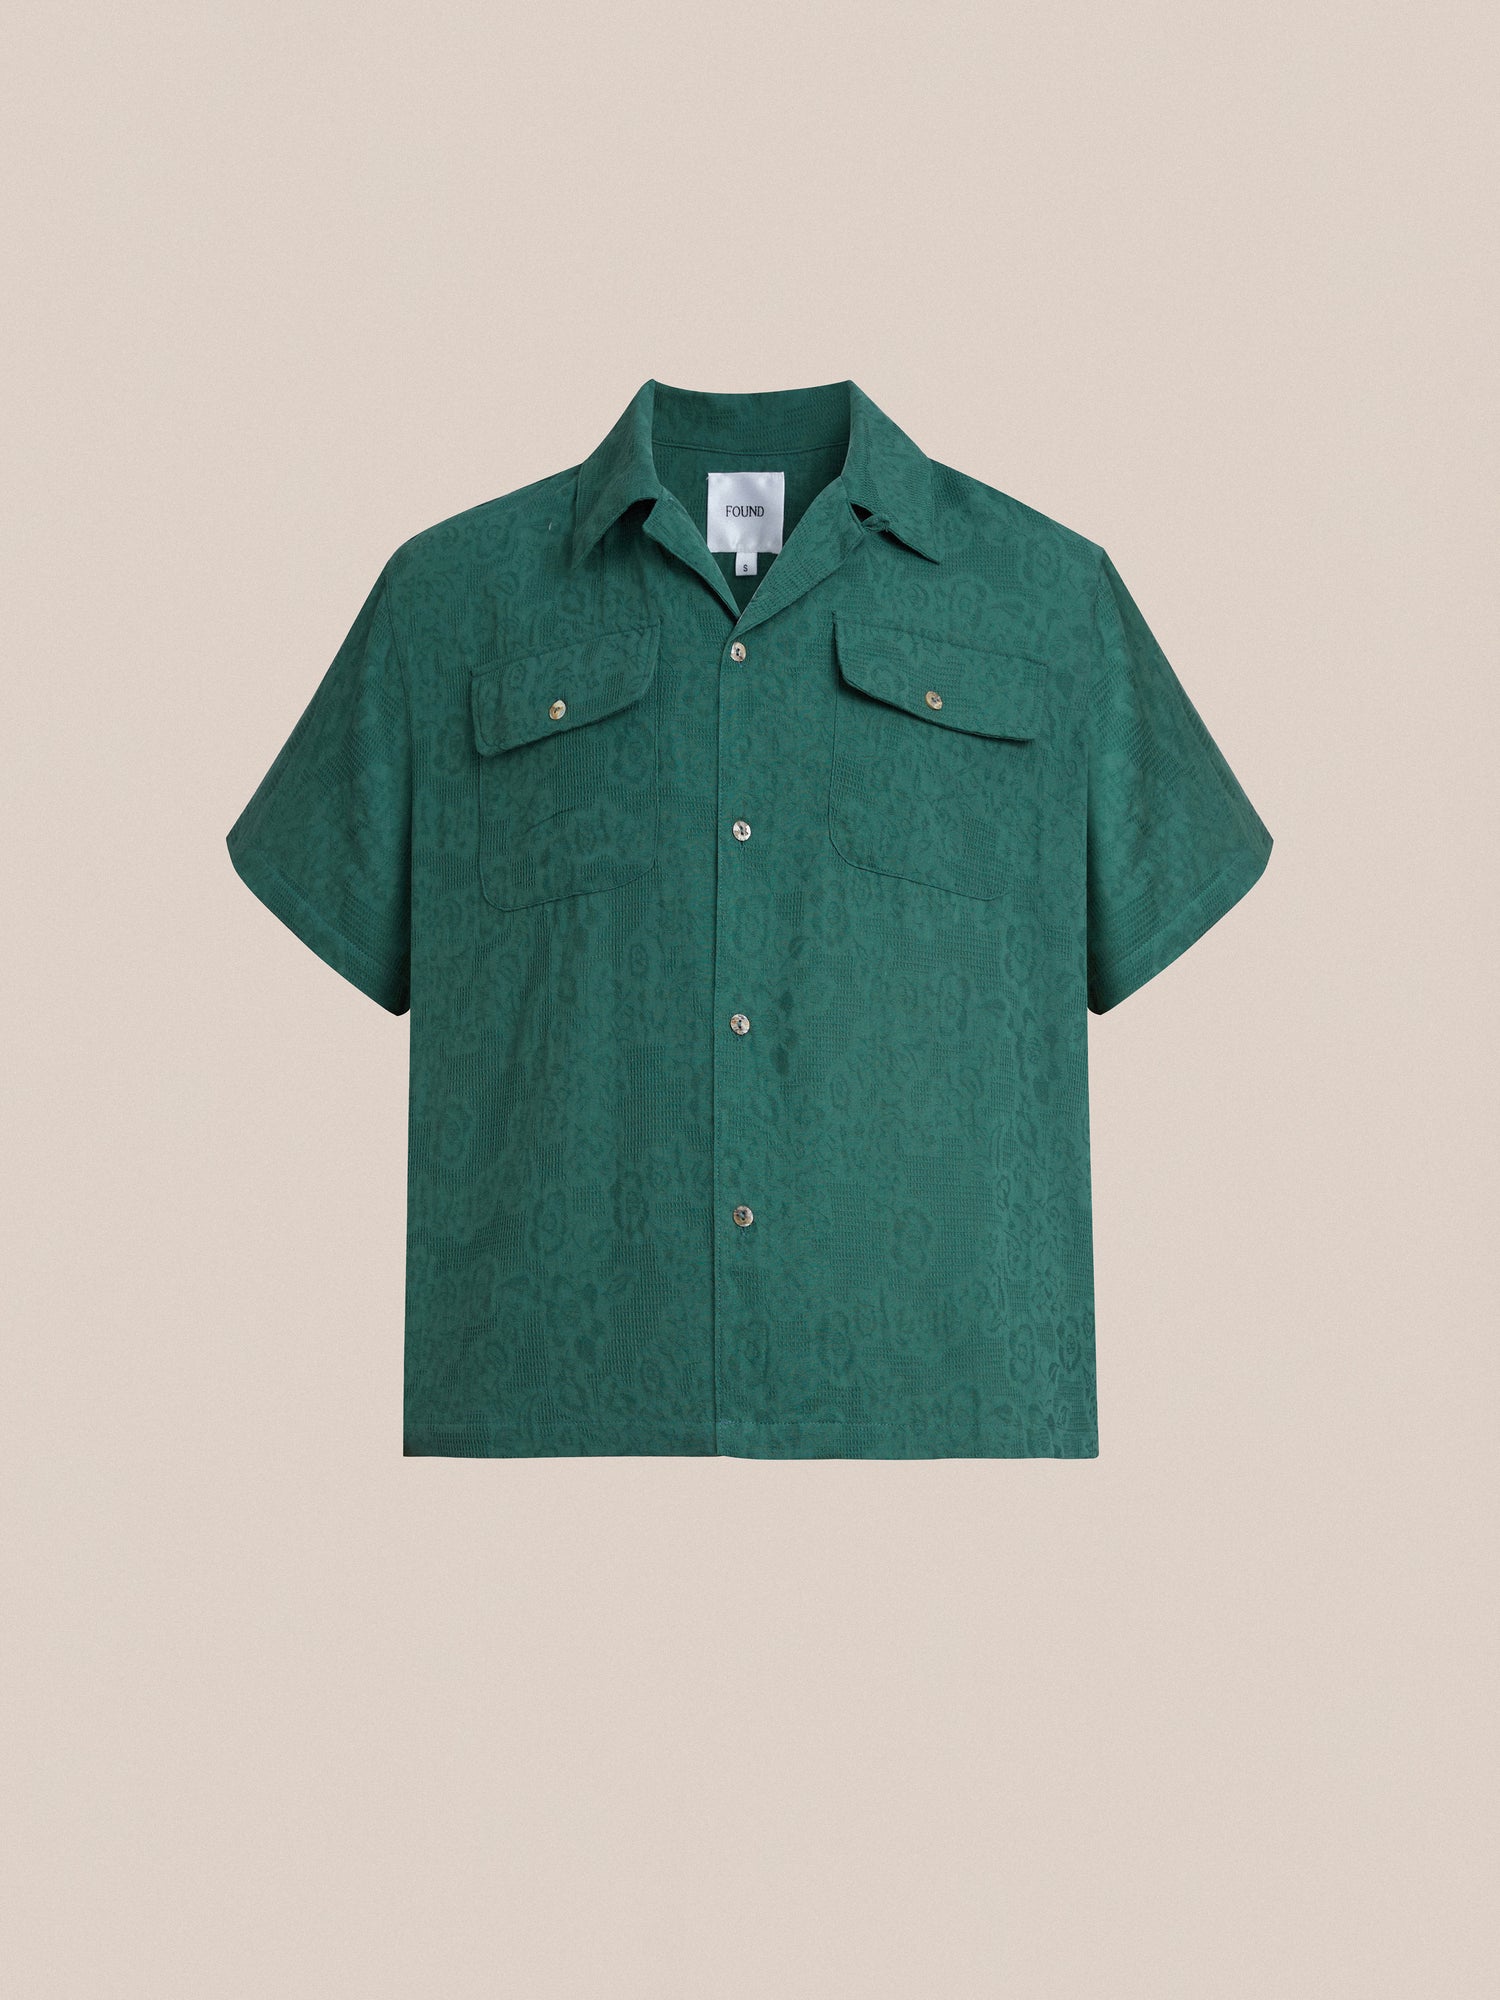 The Found Mount Camp Shirt in green.